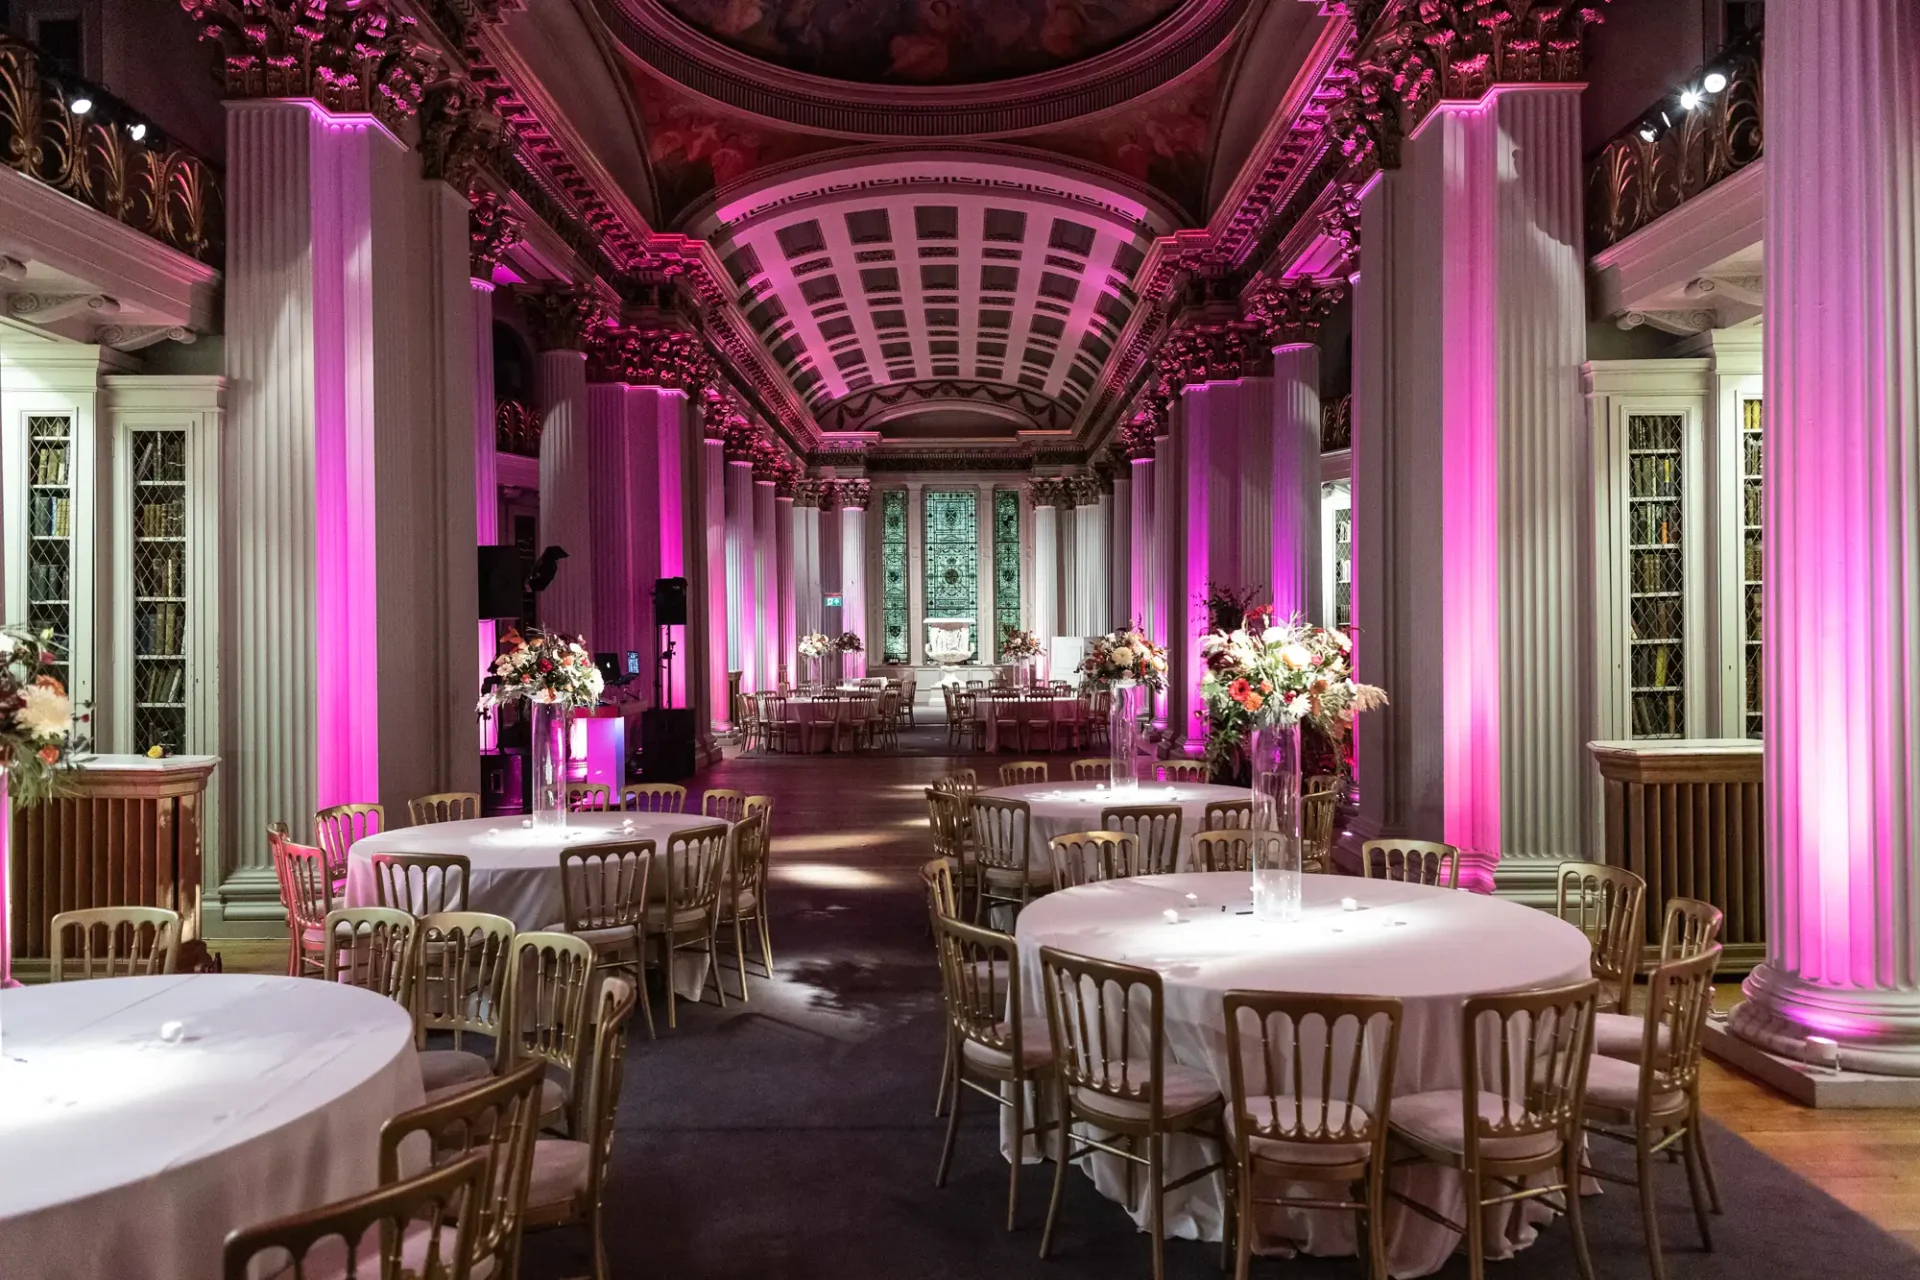 Elegant event hall with pink lighting, white round tables, and floral centerpieces, featuring grand arches and detailed ceiling.